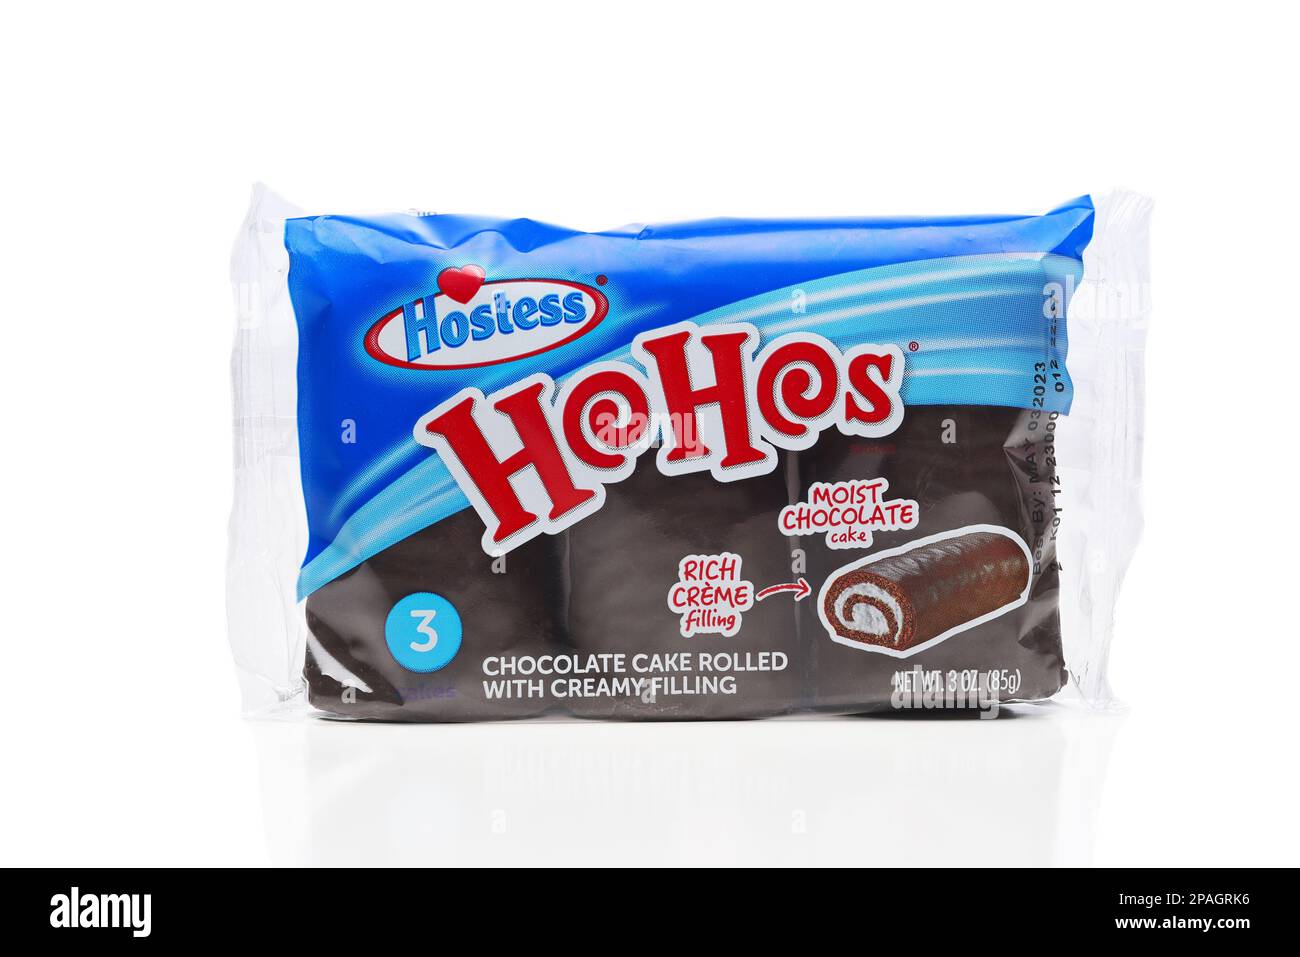 IRVINE, CALIFORNIA - 11 MAR 2023: A package of Hostess Ho Hos, a chocolate cake rolled with rich Creme Filling. Stock Photo